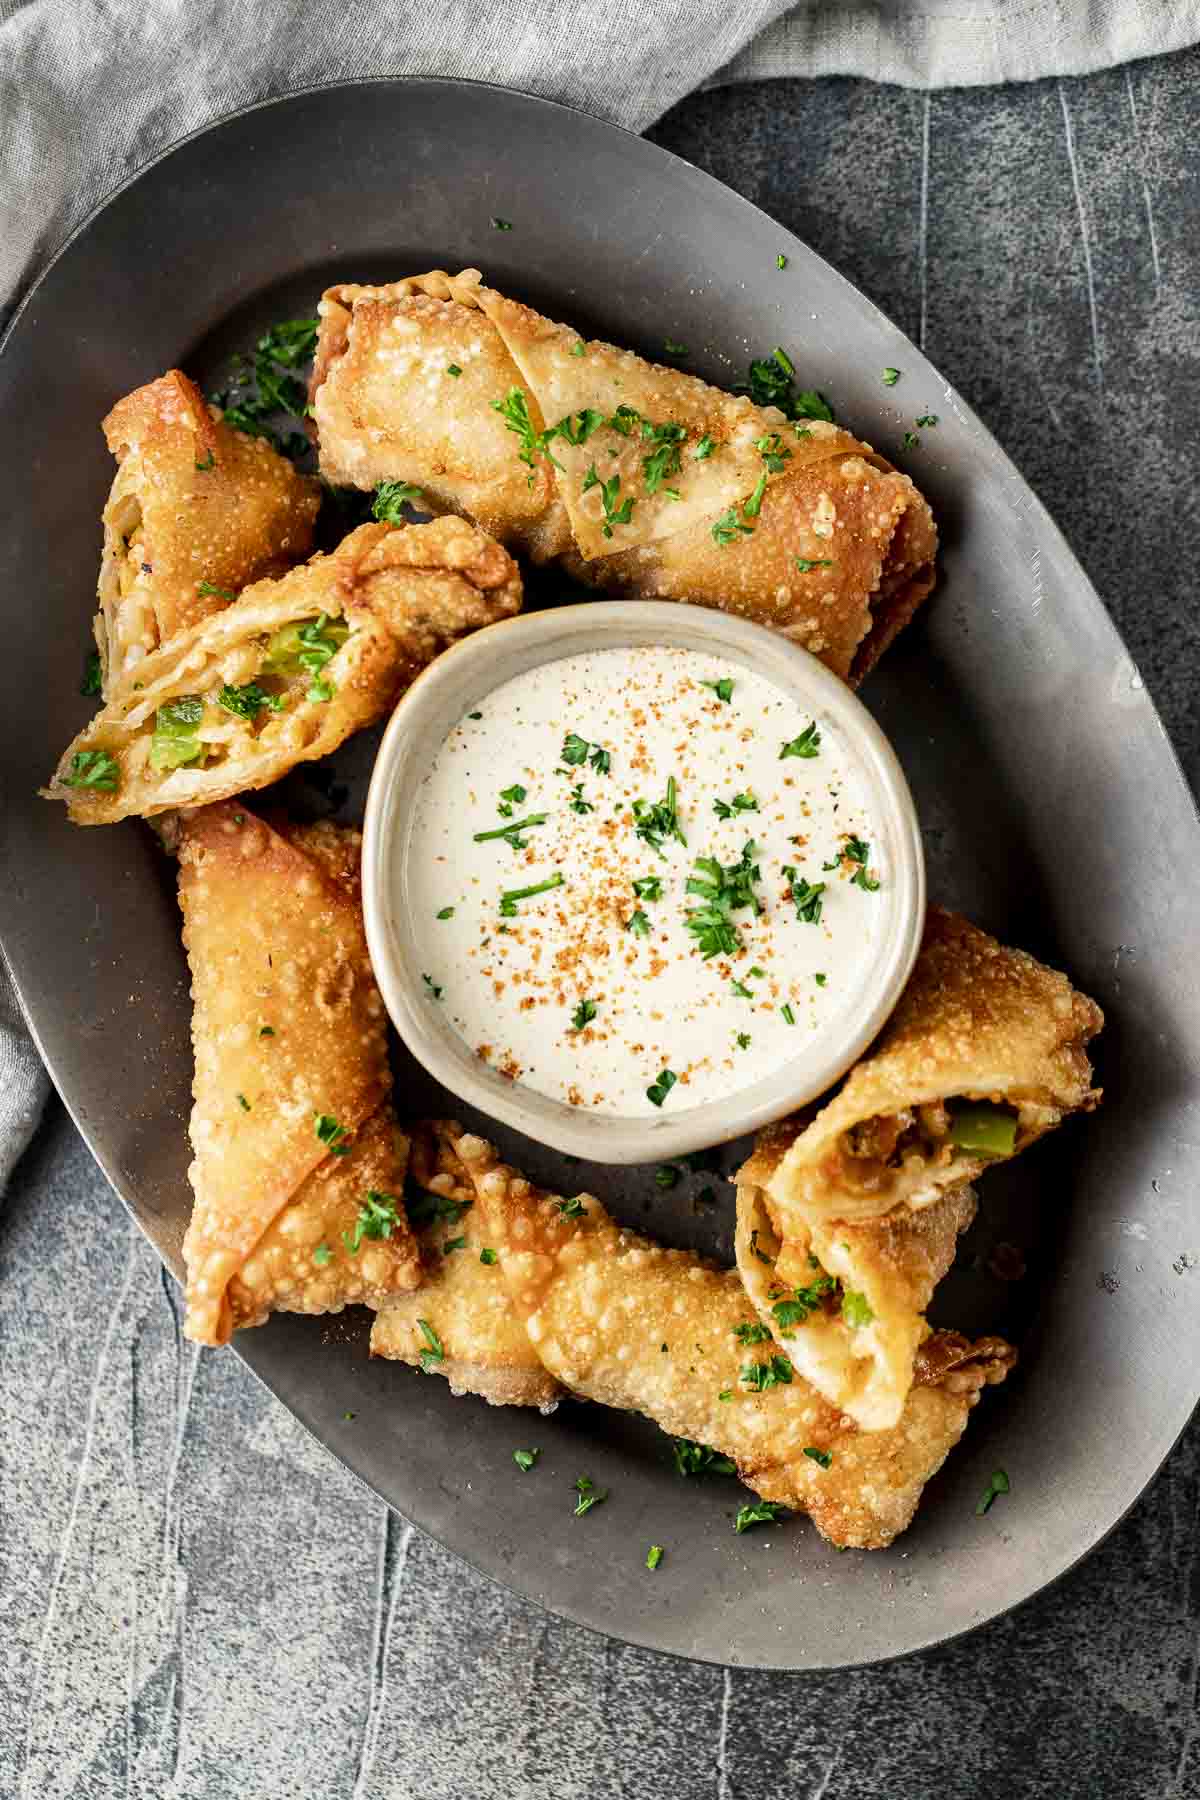 a plate of egg rolls with white dipping sauce garnished with red pepper seasoning and parsley